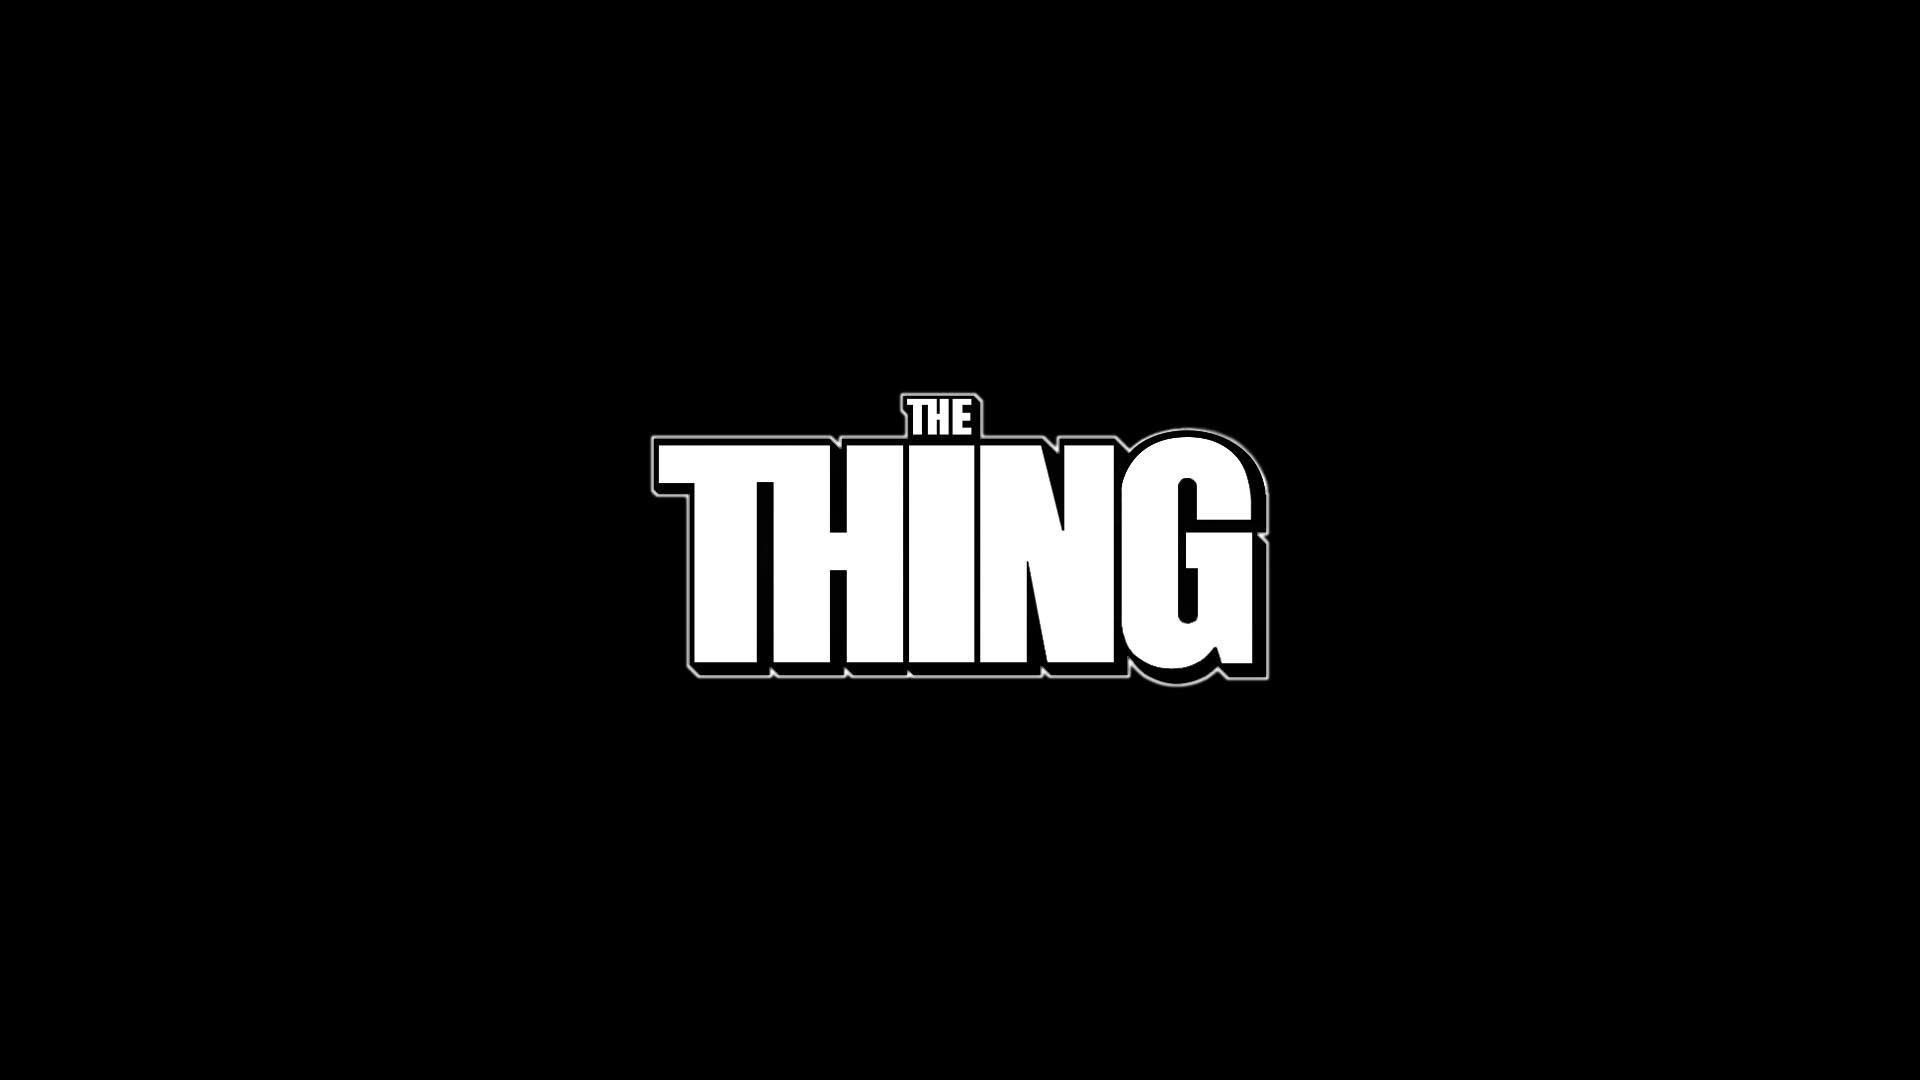 The Thing (1982) Wallpaper HD Download